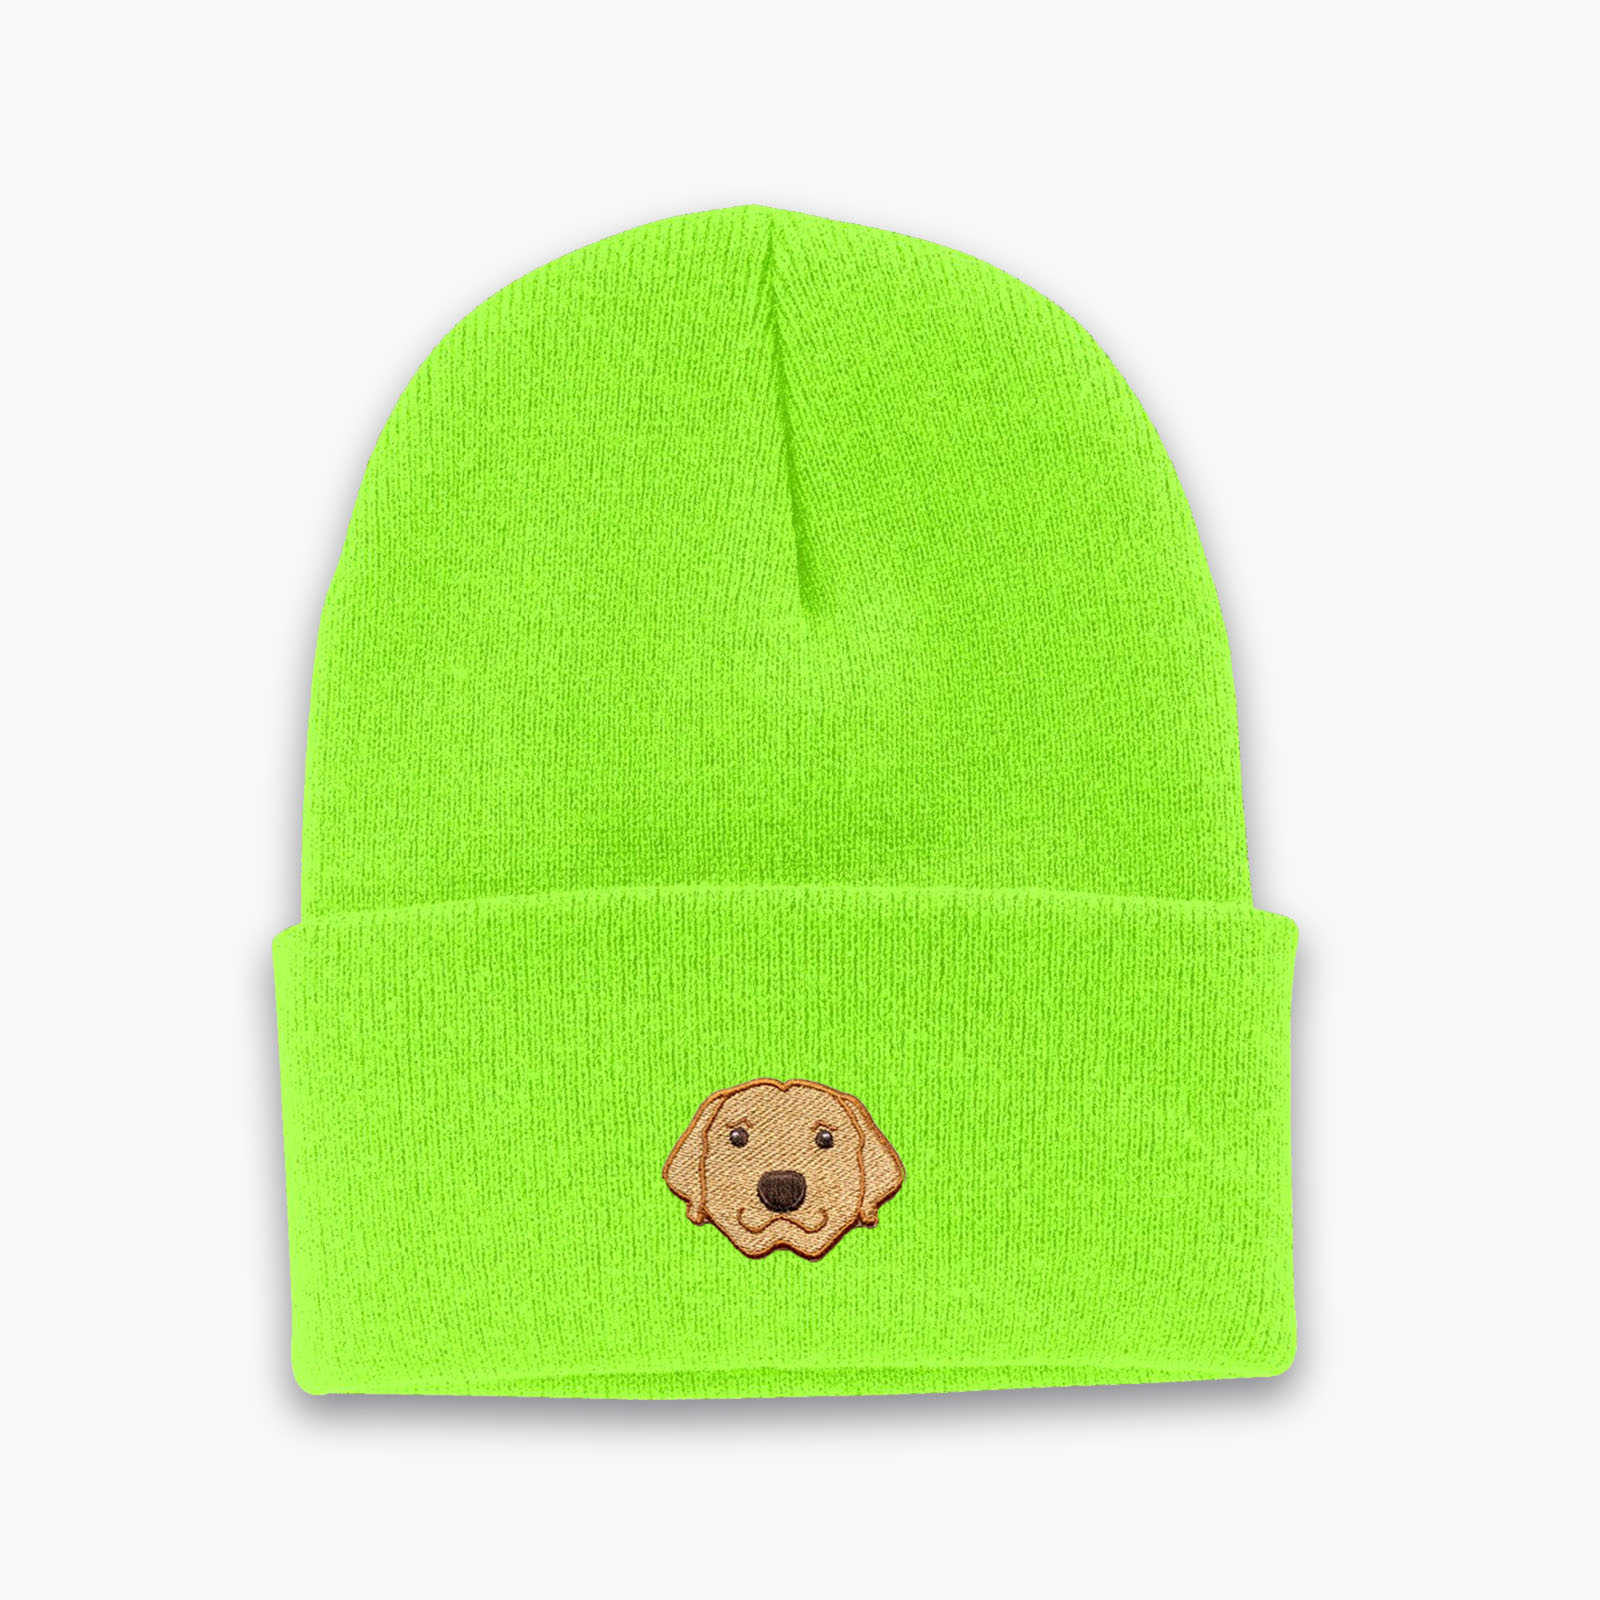 Neon Green Custom Dog beanie personalized and embroidered on the front.